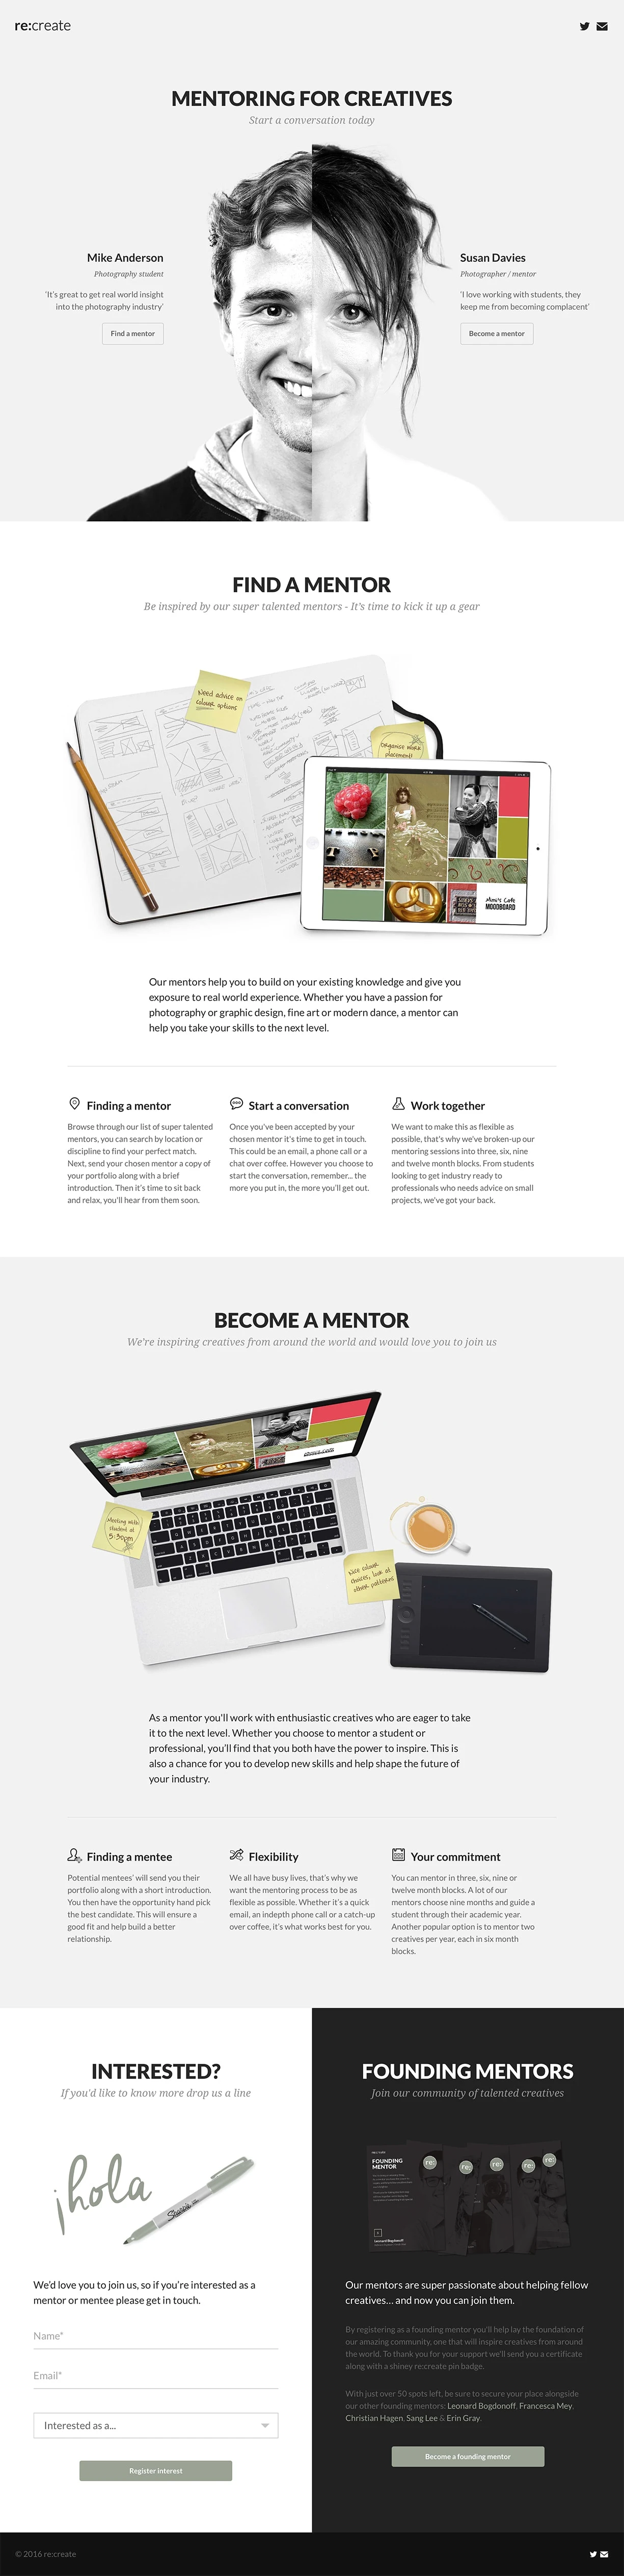 re:create Landing Page Example: Be inspired by our super talented mentors - It’s time to kick it up a gear